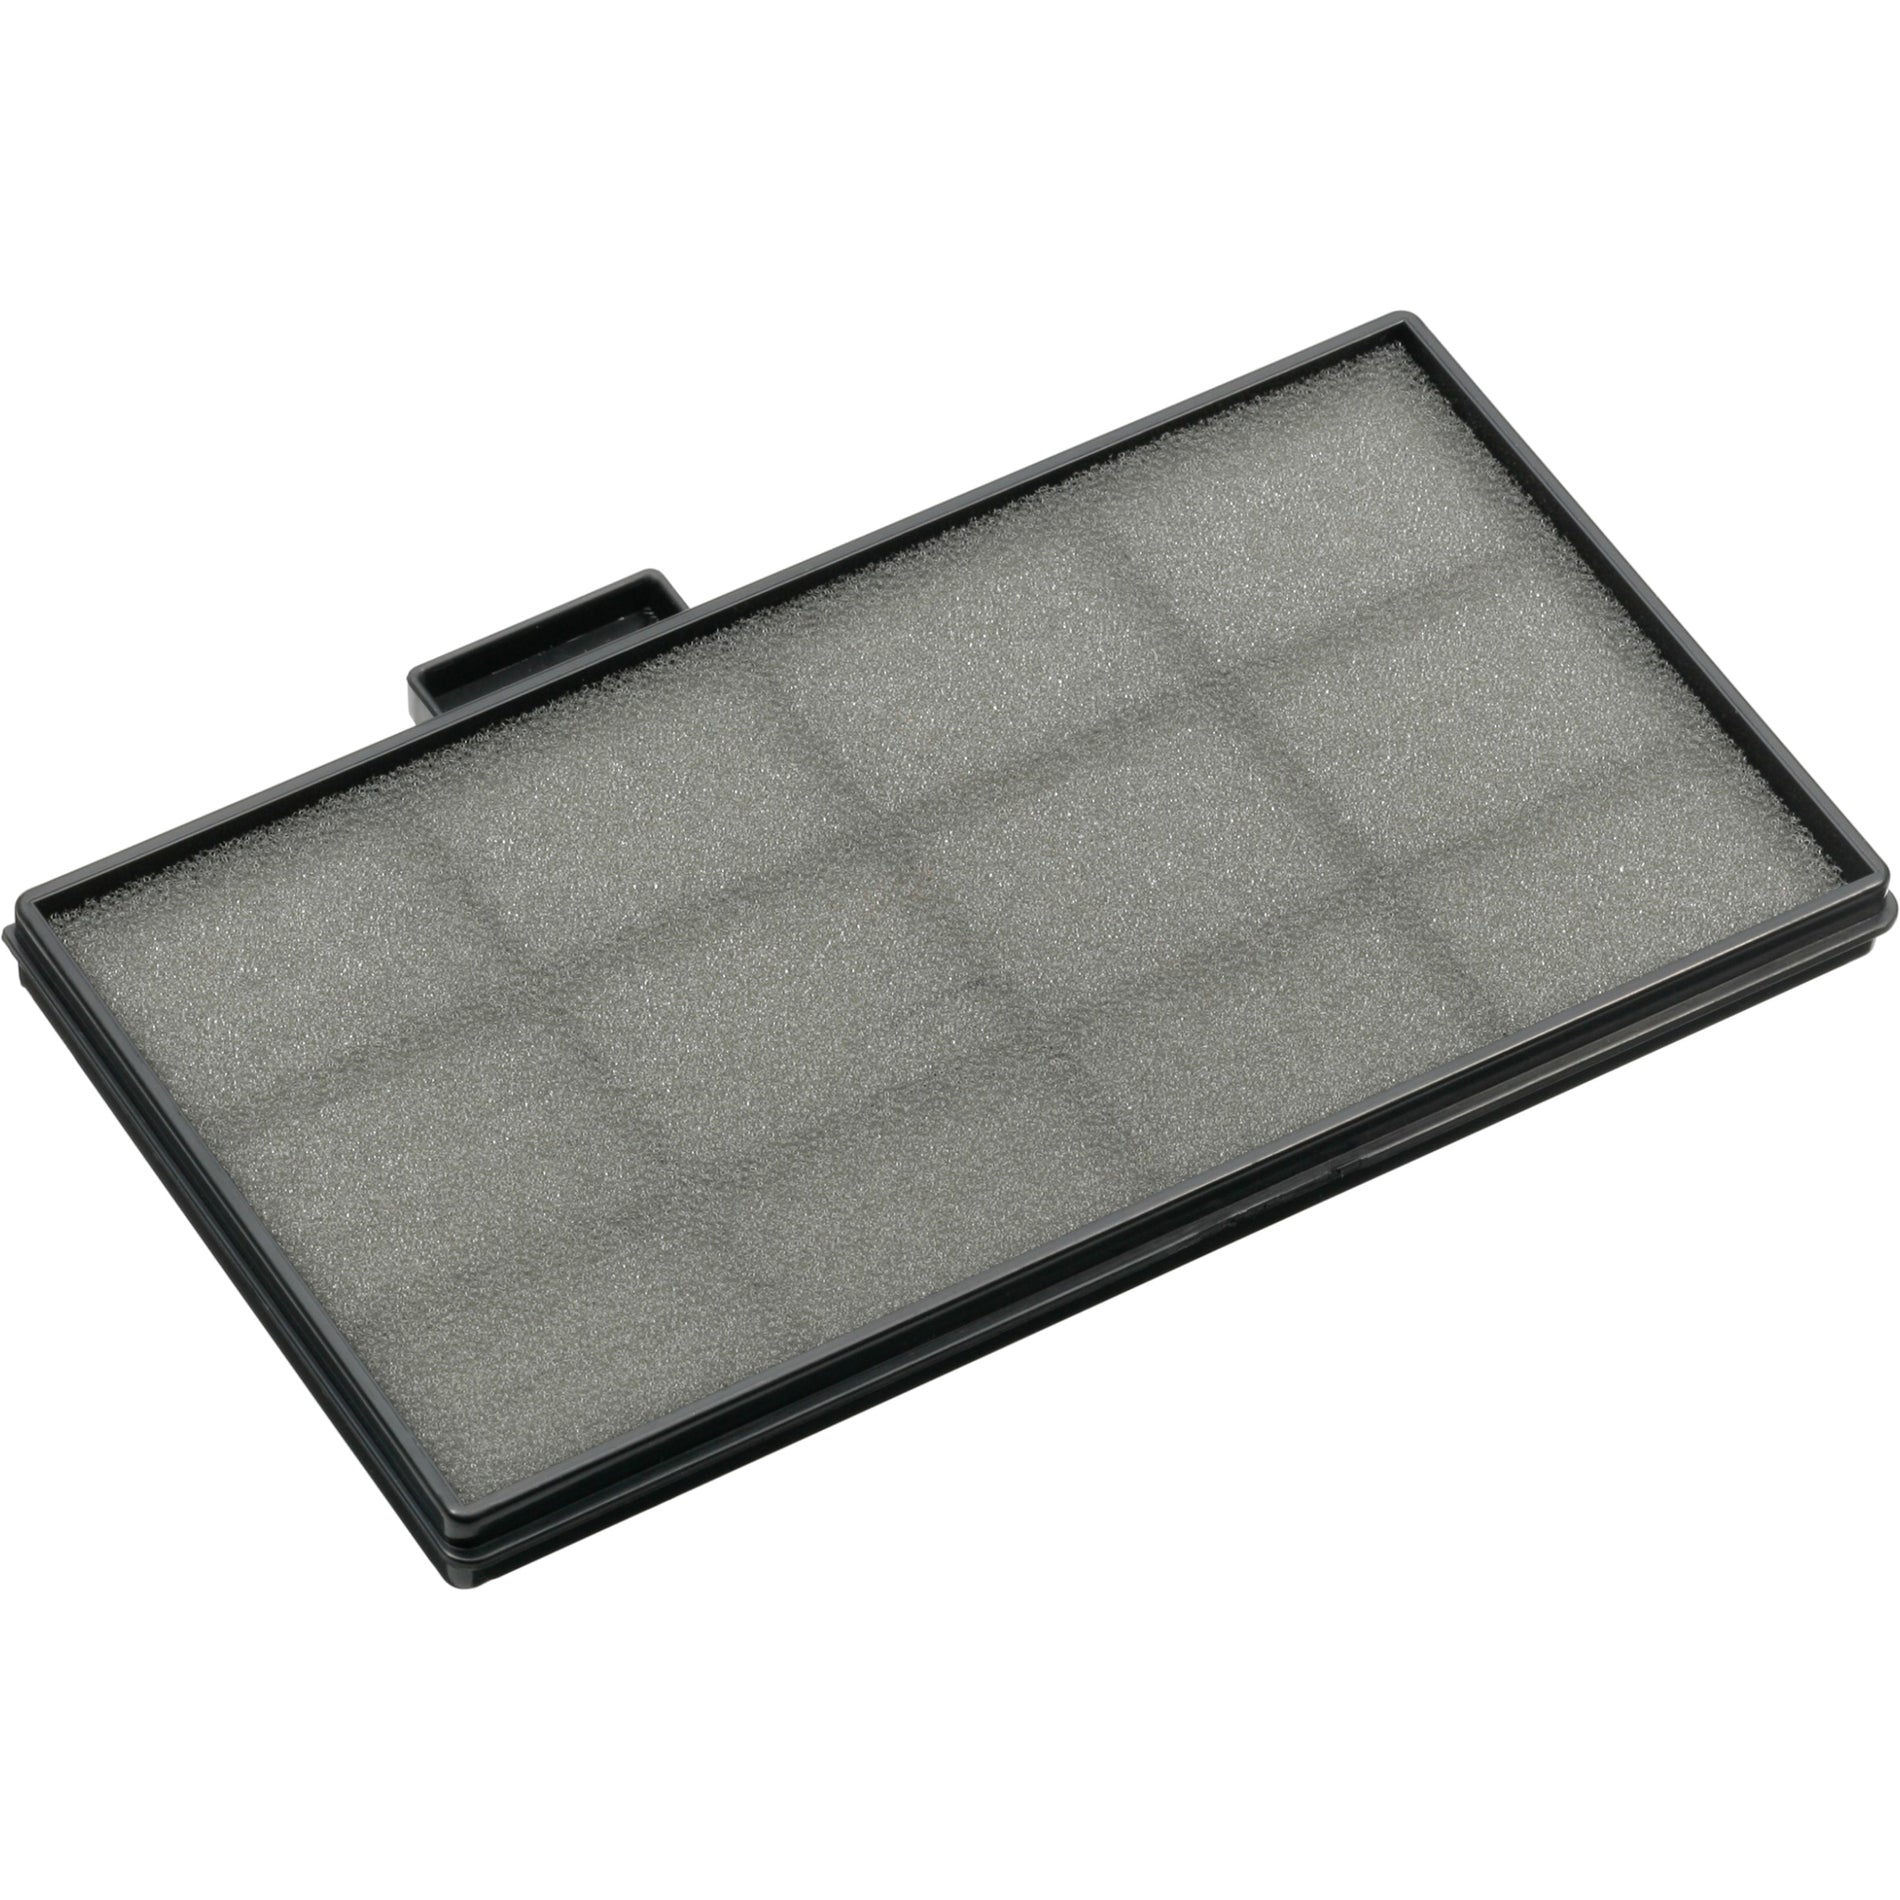 Epson V13H134A32 Replacement Air Filter - For Projector, Improve Air Quality and Extend Projector Lifespan